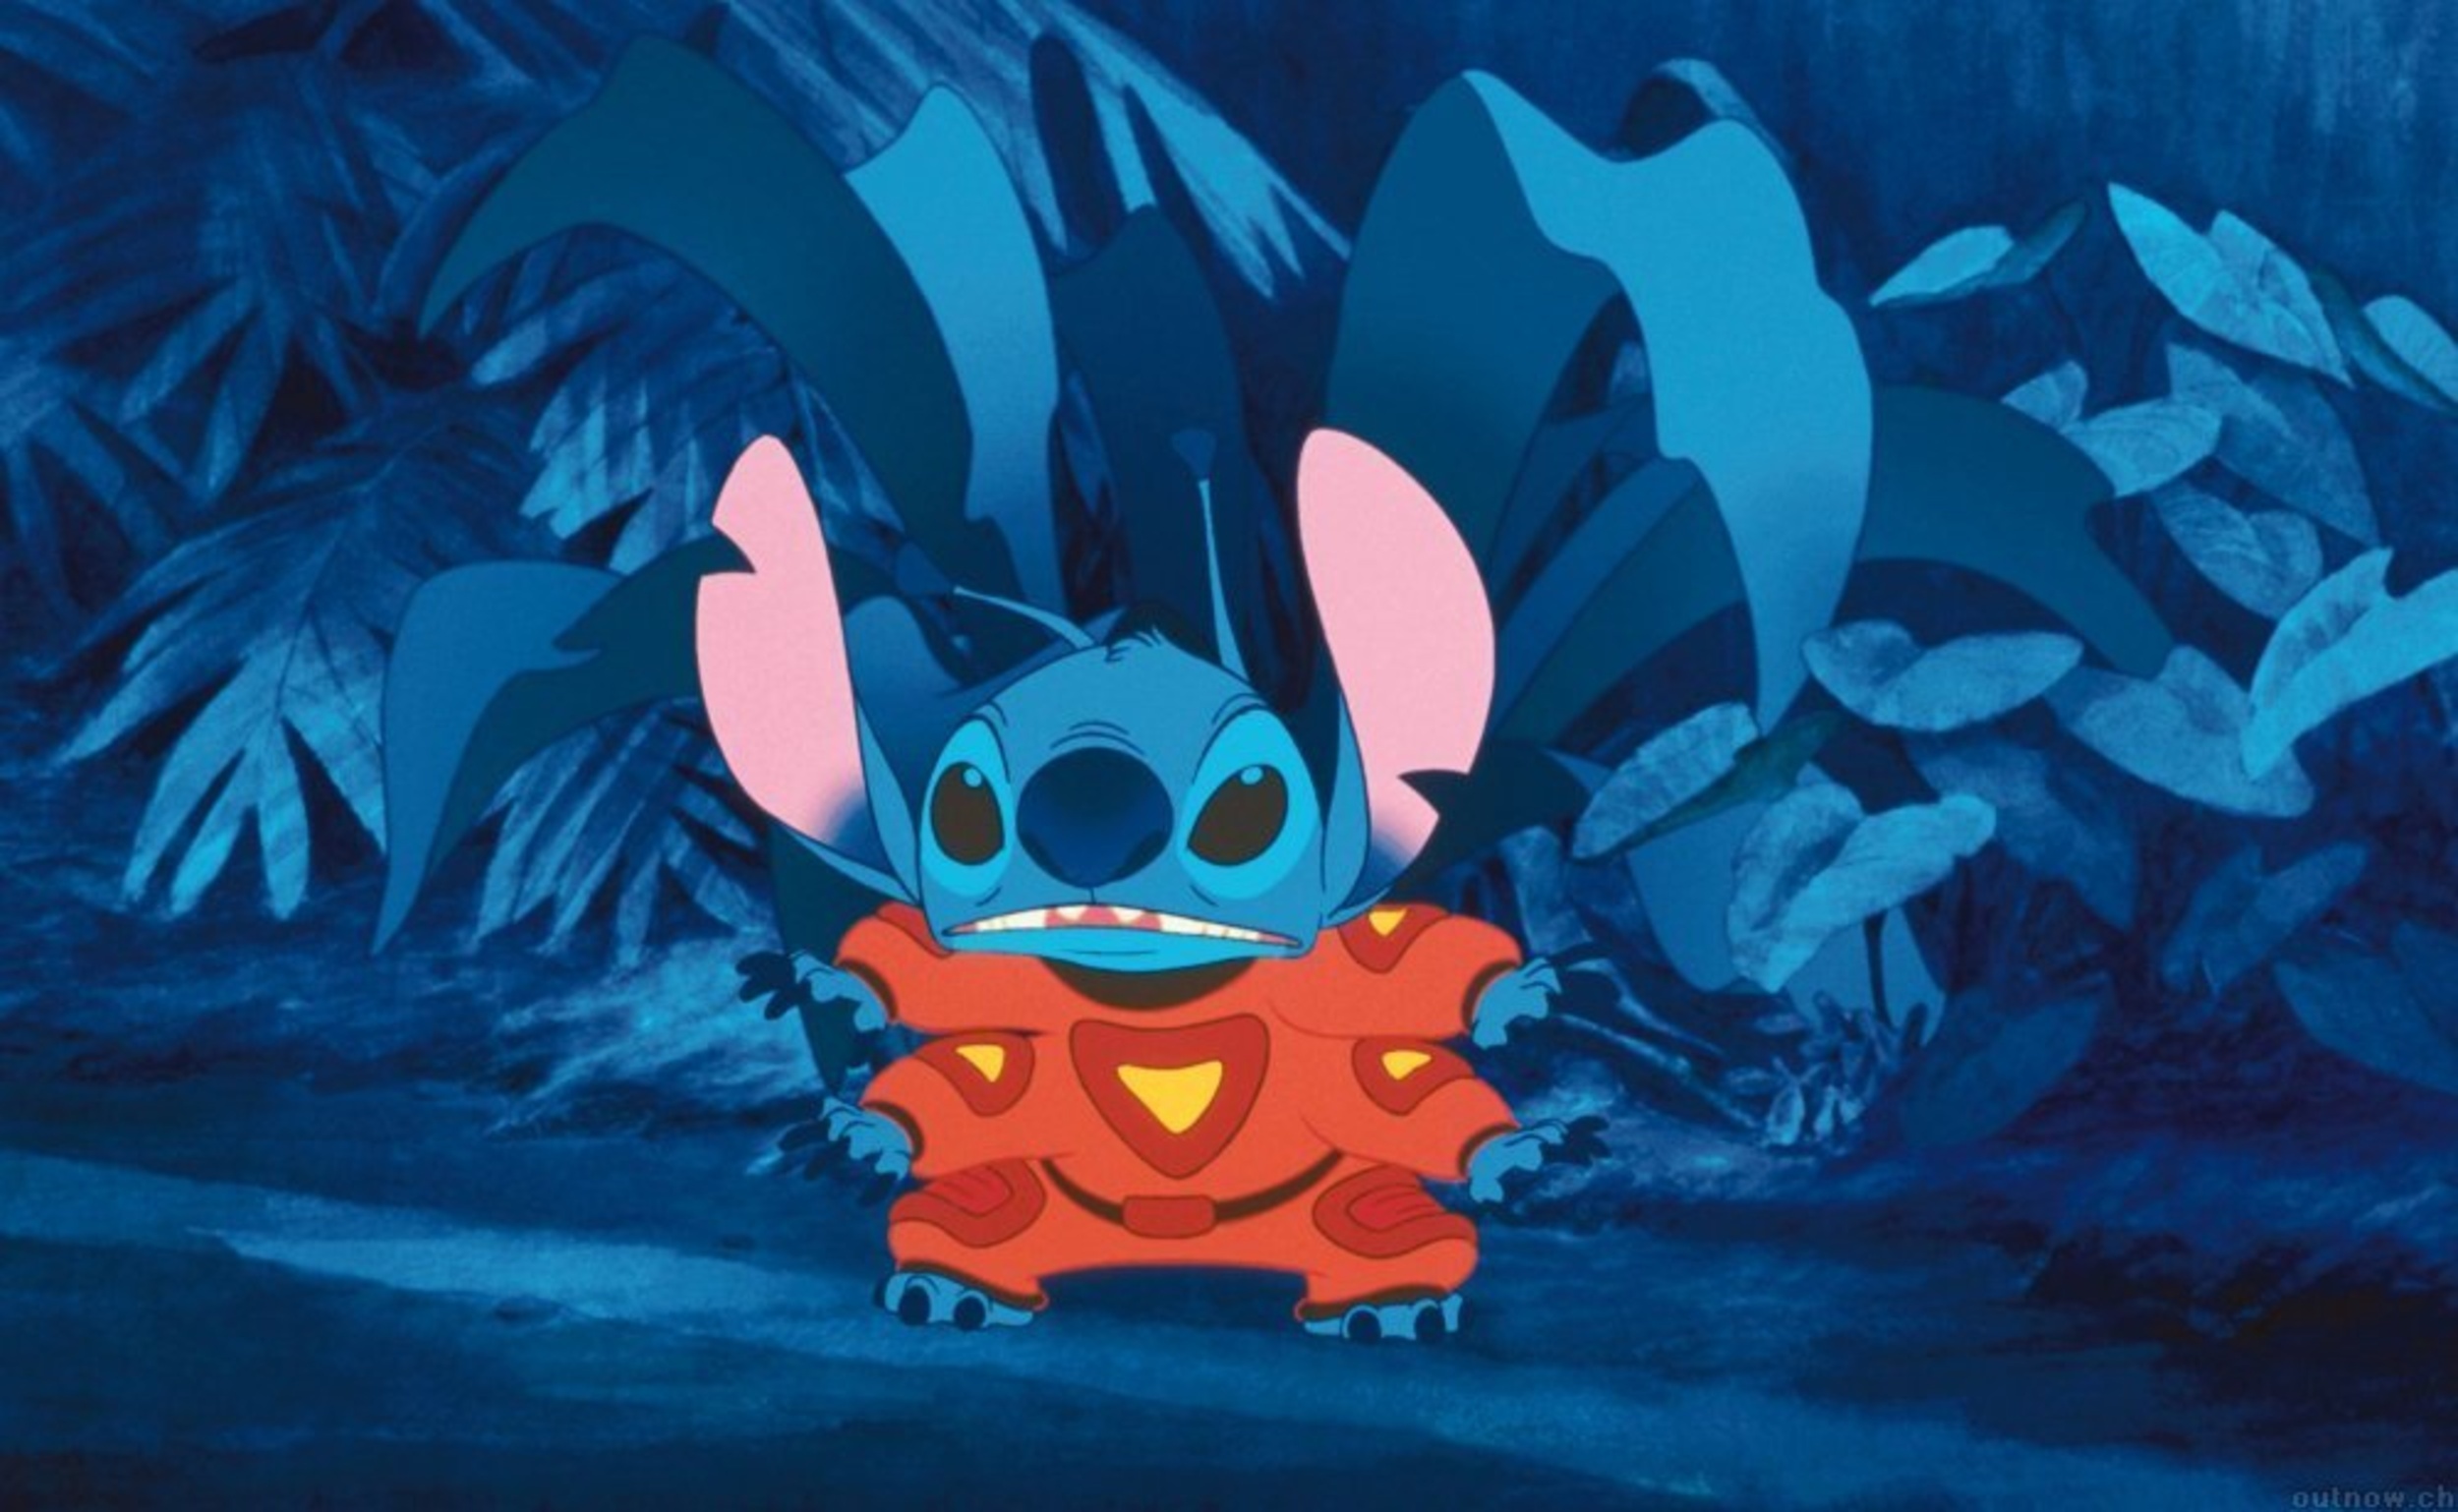 <p><span>Disney went through a bit of a lull after their Renaissance Era, but one movie that stood out during that time was <em>Lilo & Stitch</em>, and a big reason for it being such a hit was the chaotic blue alien who became family.</span></p><p>You may also like: <a href='https://www.yardbarker.com/entertainment/articles/the_20_best_actor_comebacks_032724/s1__38628846'>The 20 best actor comebacks</a></p>